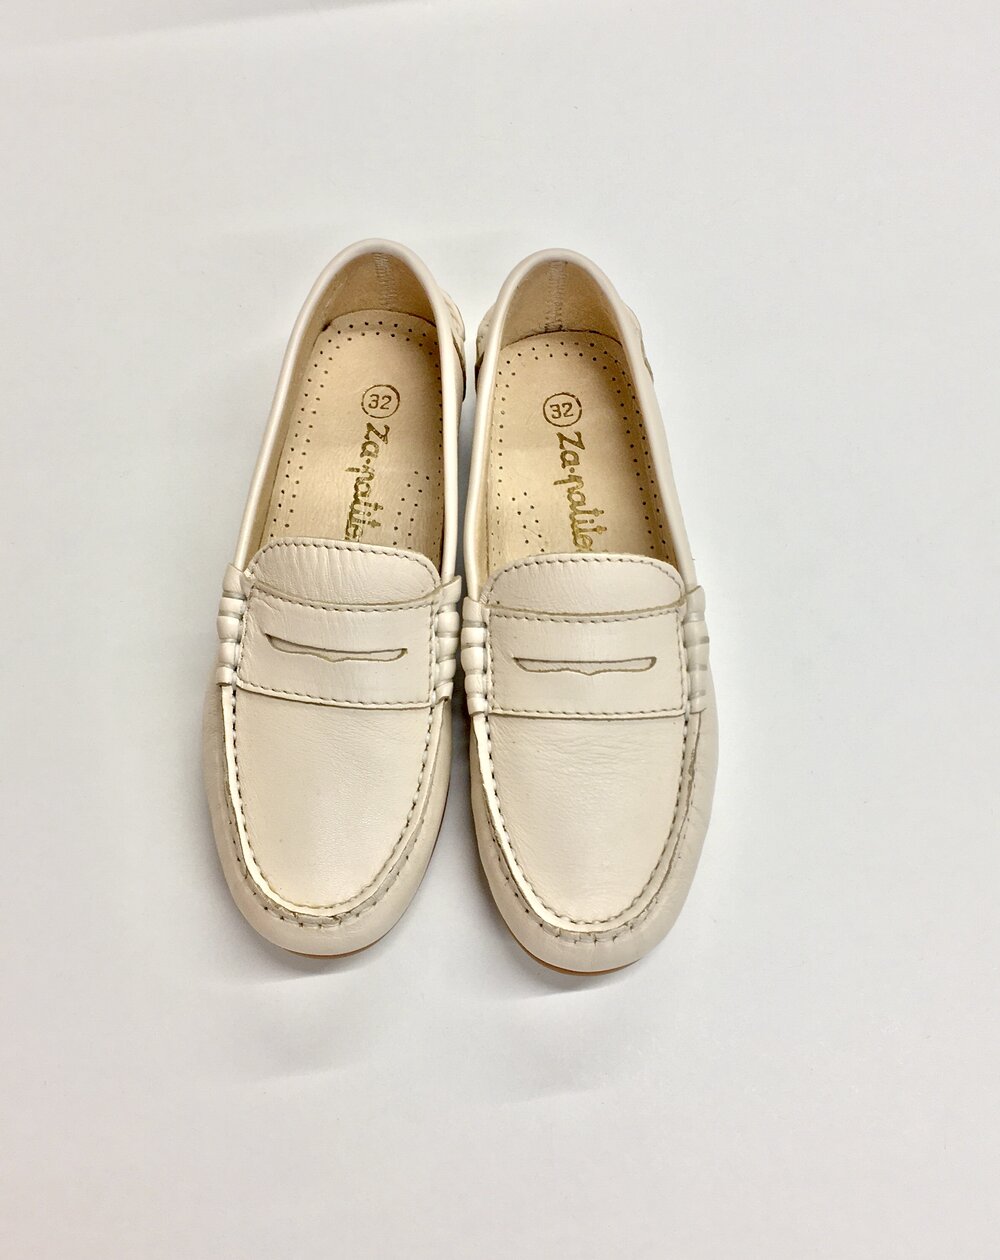 uanset Forord prøve cream leather pageboy shoes - Little Bevan occasion clothes for babies and  children for Christenings, weddings and parties at Little Bevan